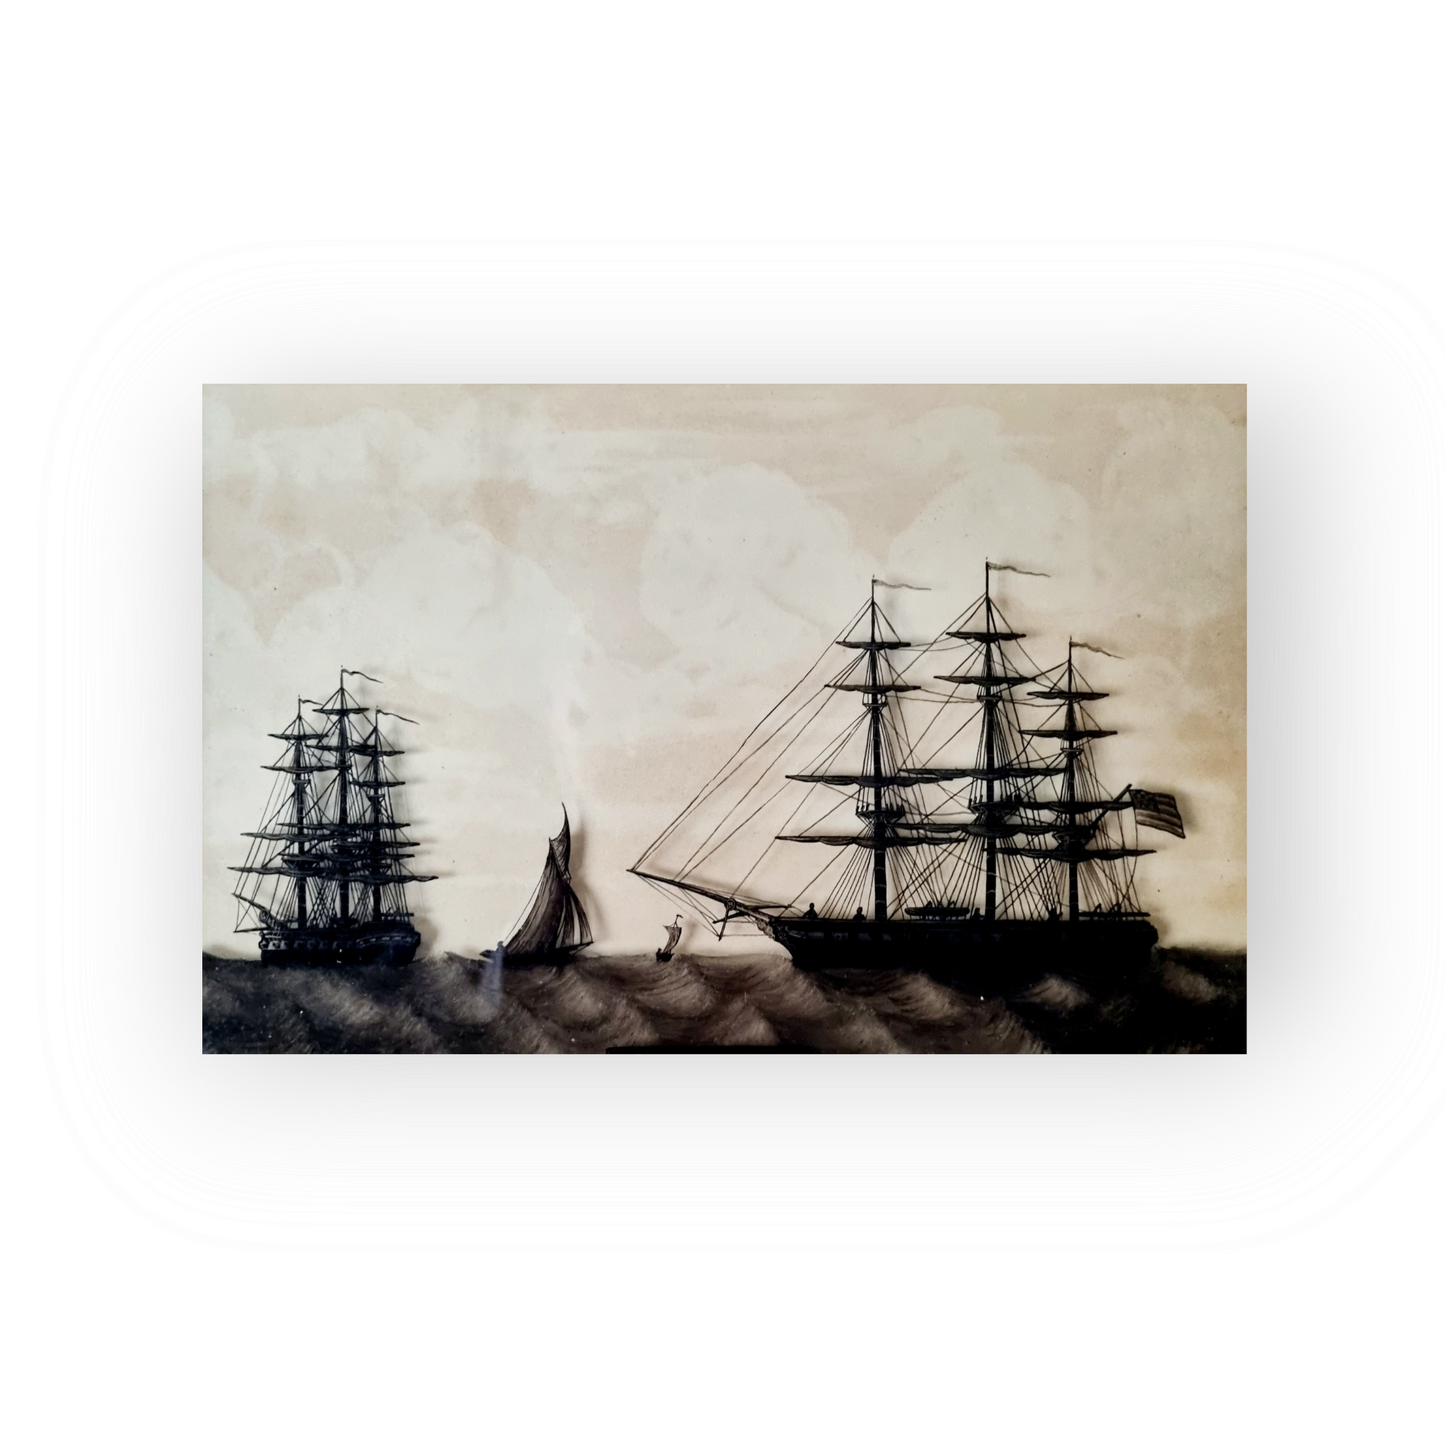 A Fine Pair of Late 18th Century American Nautical Antique Reverse Paint on Glass Silhouette Pictures of US "Perseverence" & USS "Constitution", circa 1797